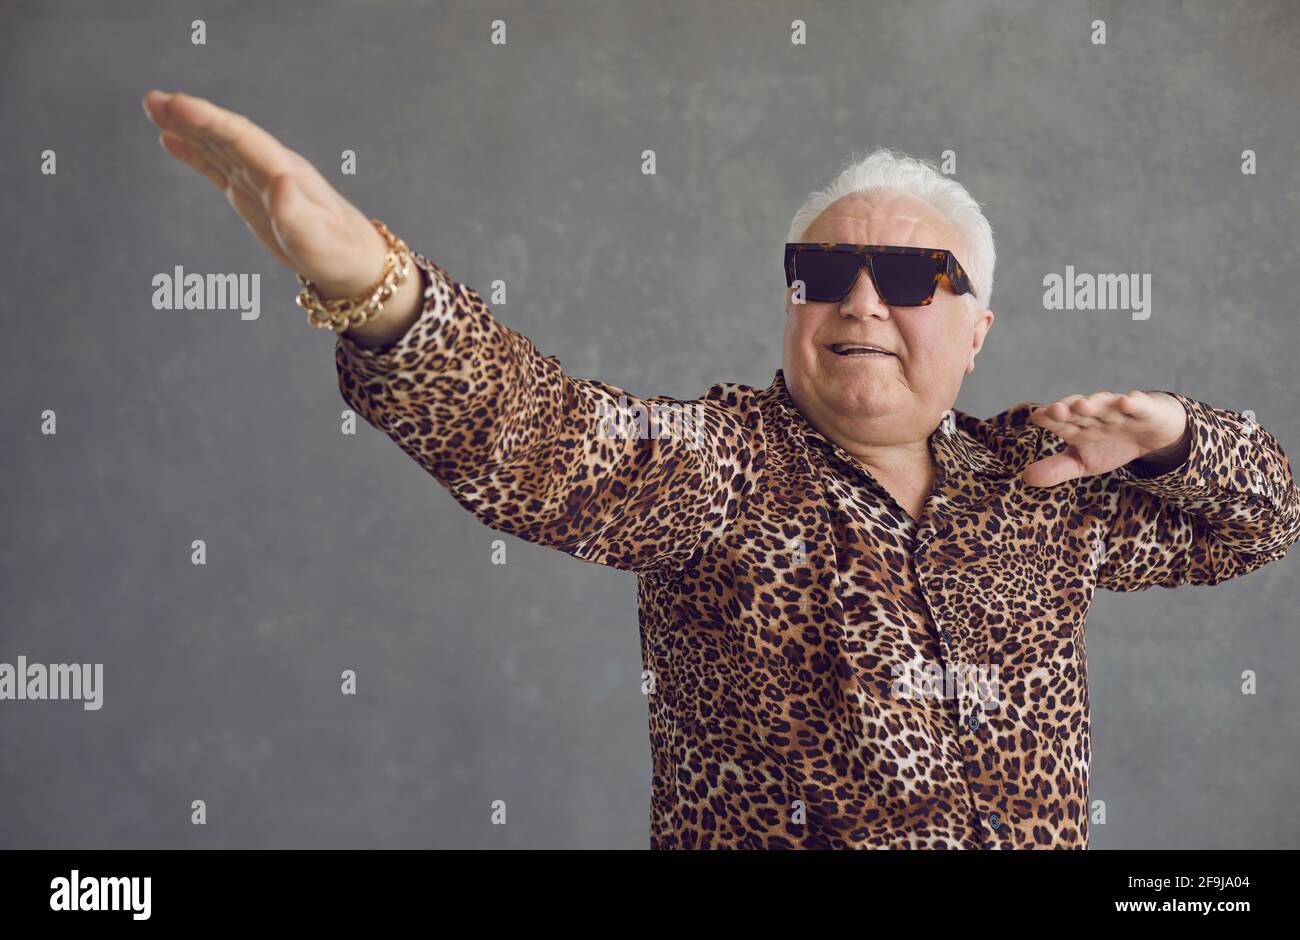 Studio portrait of funny dancing rich senior man in leopard shirt and cool glasses Stock Photo